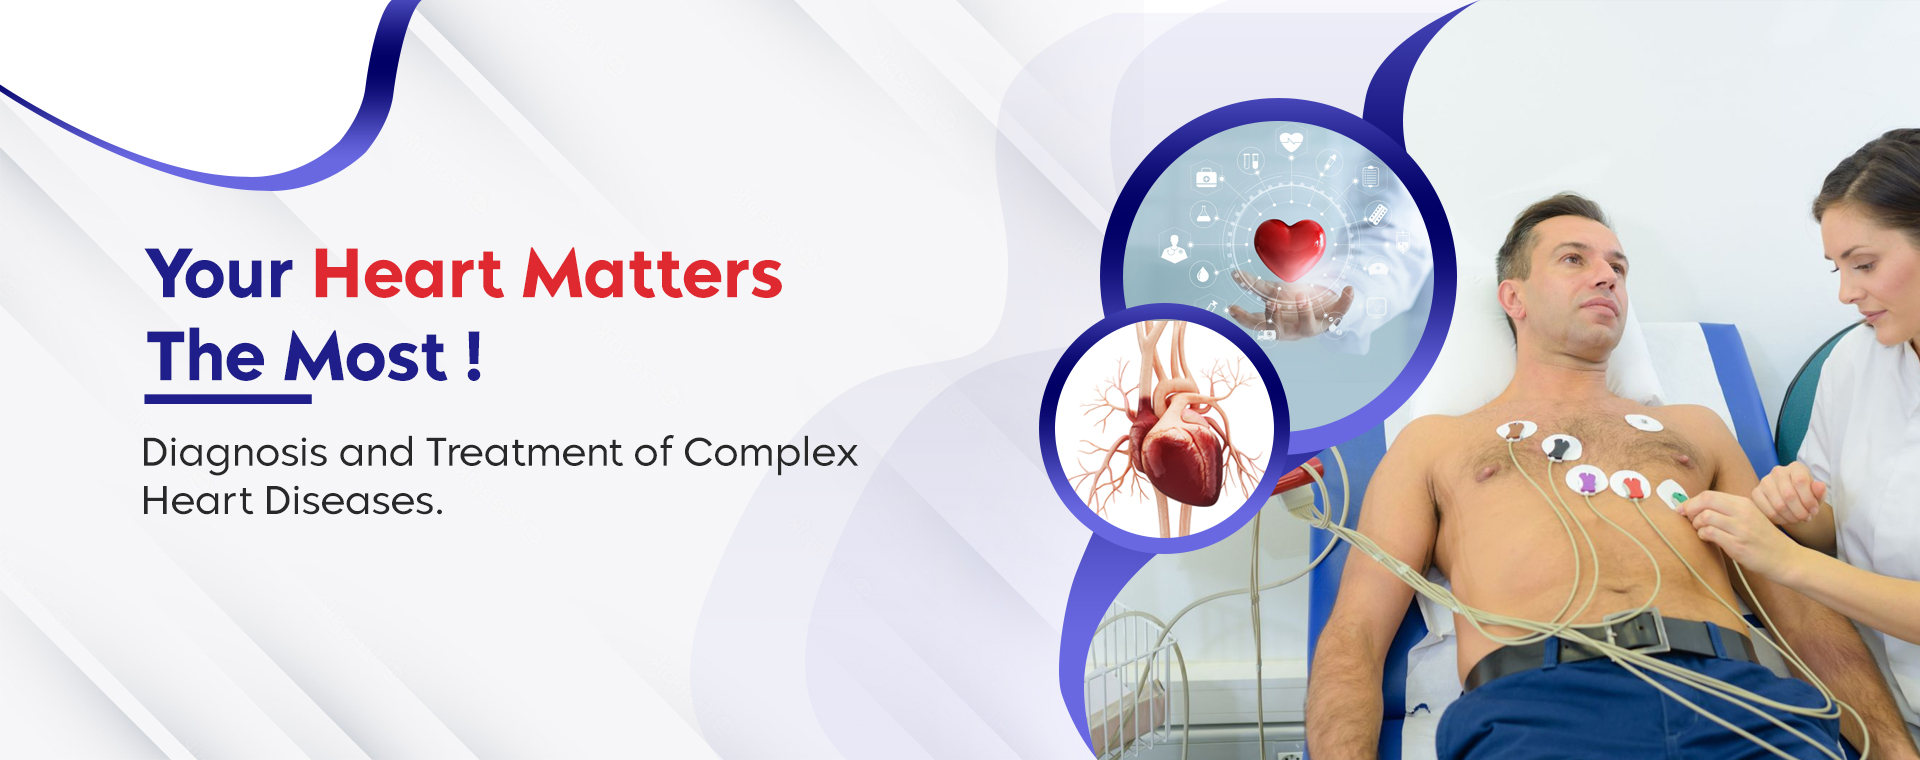 Best Cardiologist in Navi Mumbai for treating Heart Problems